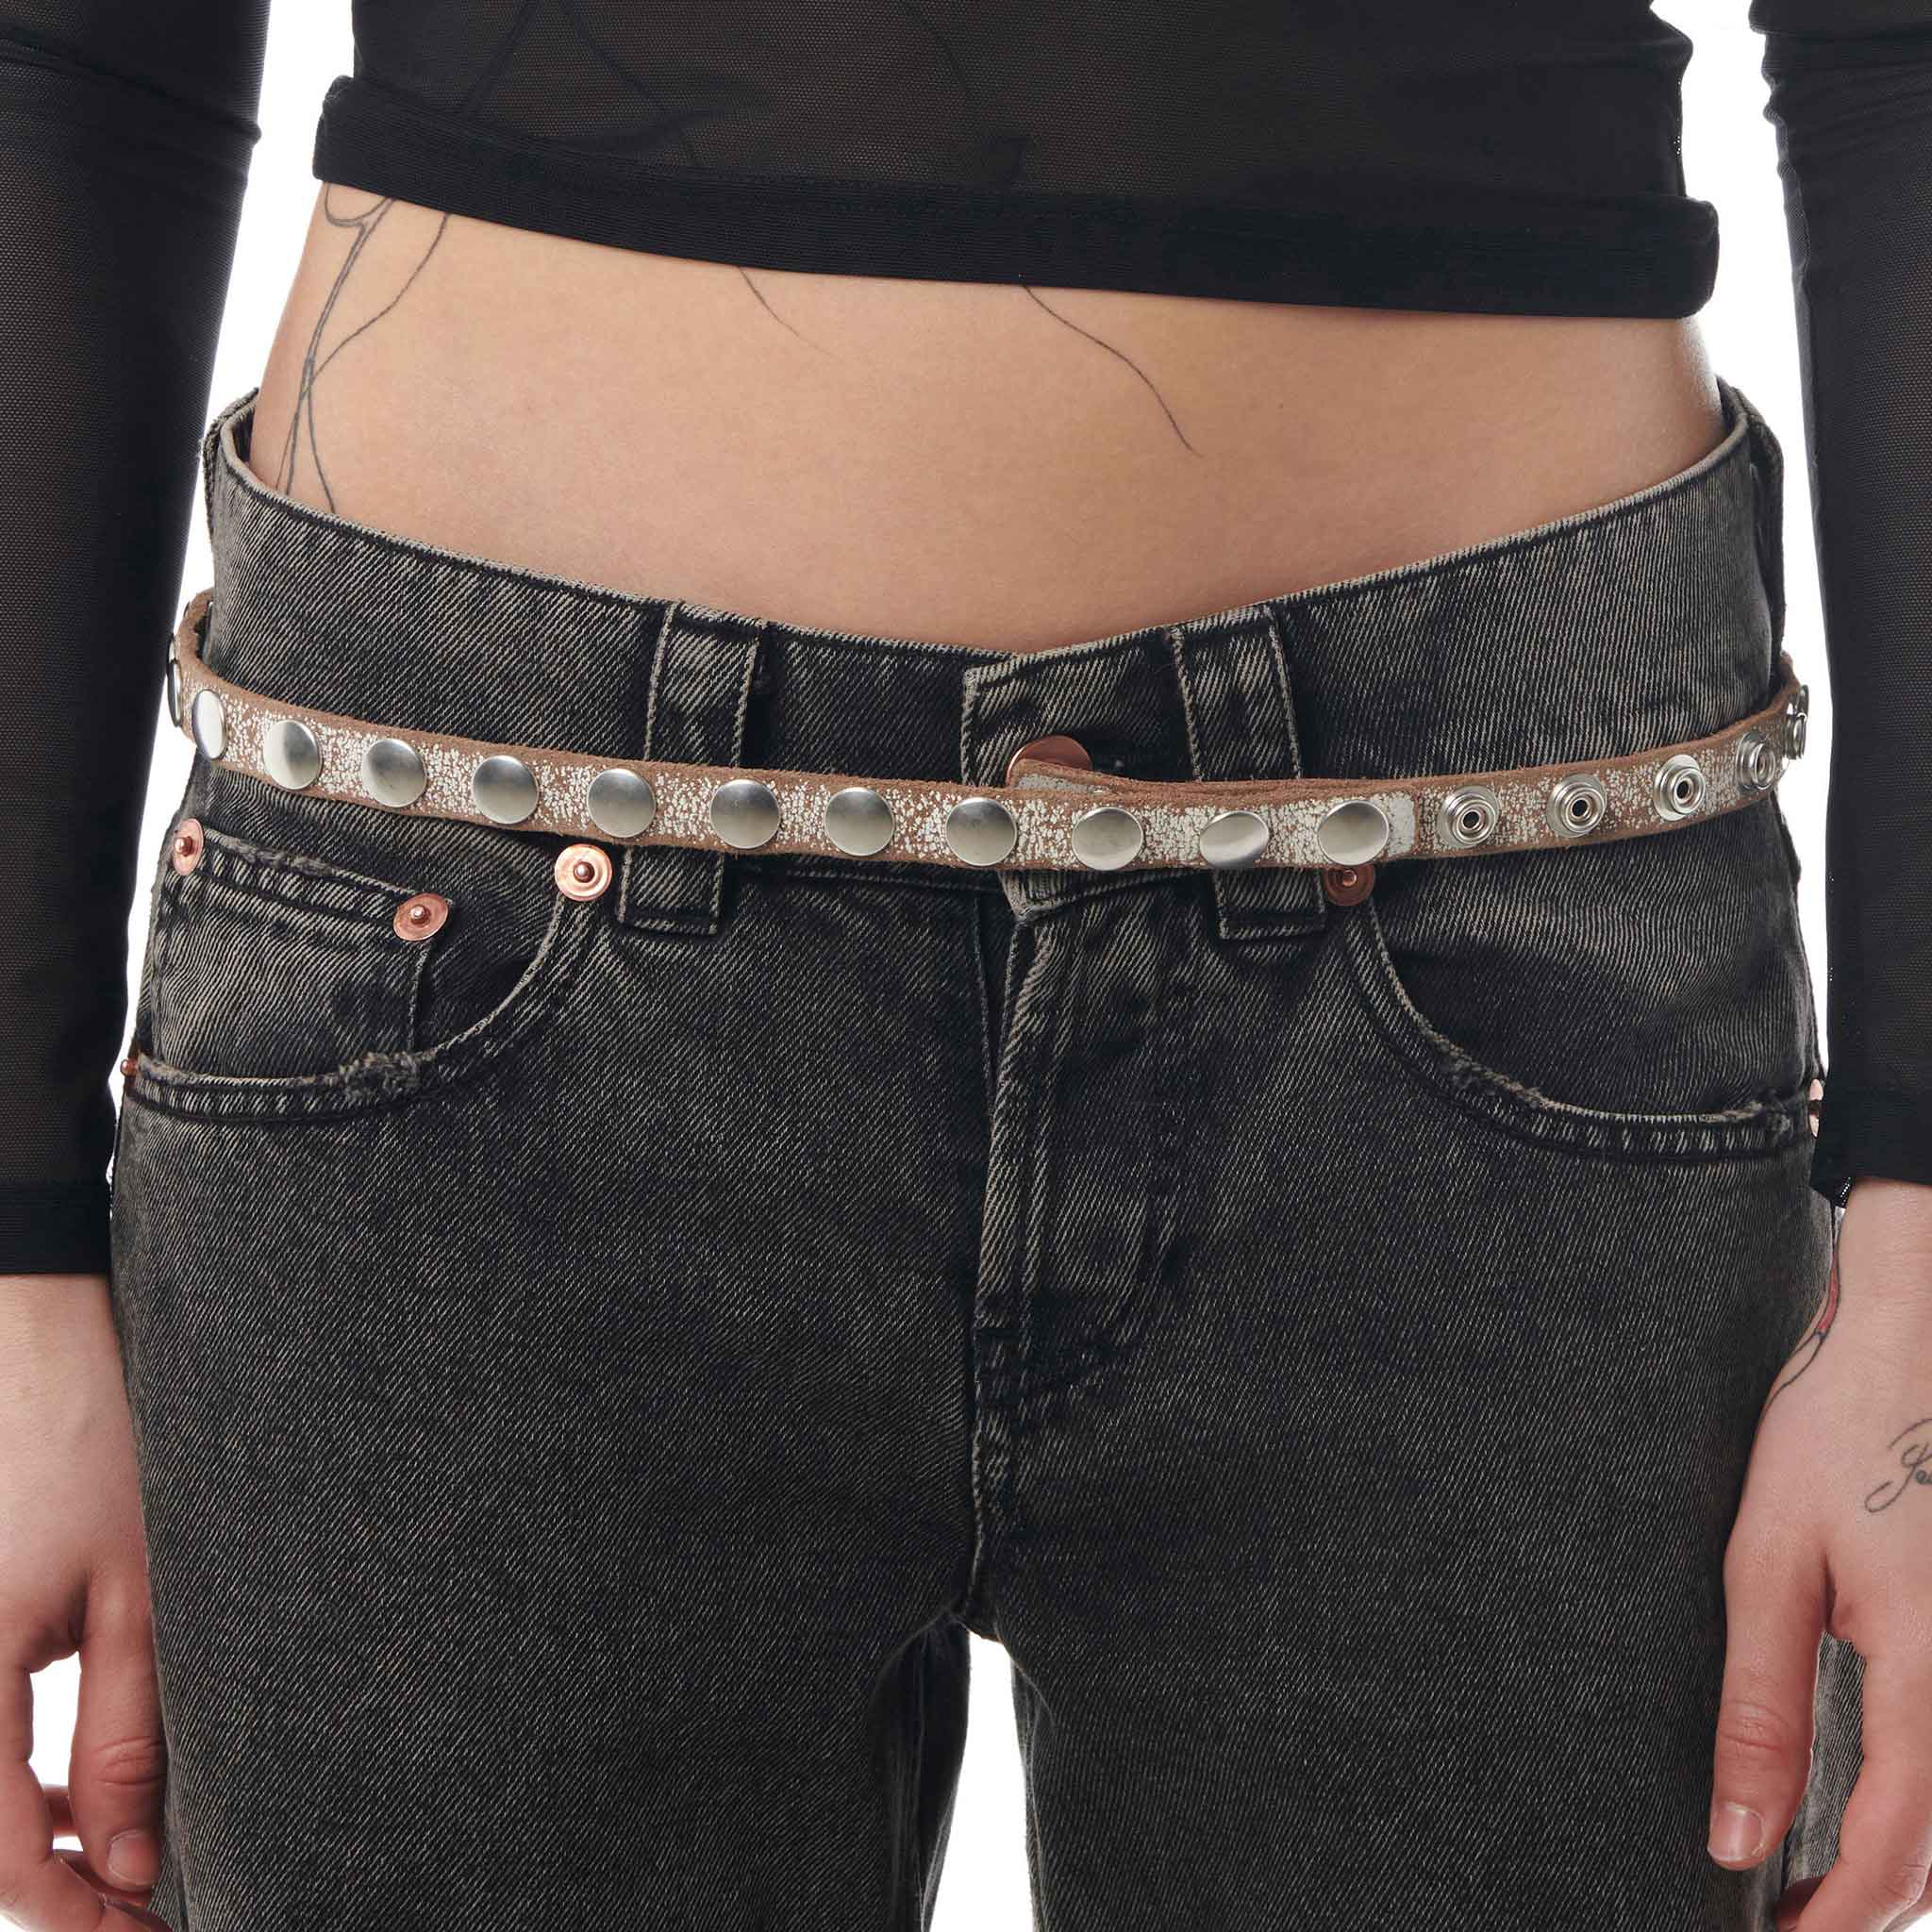 Close detail photo of model wearing the Snap Skinny Belt.